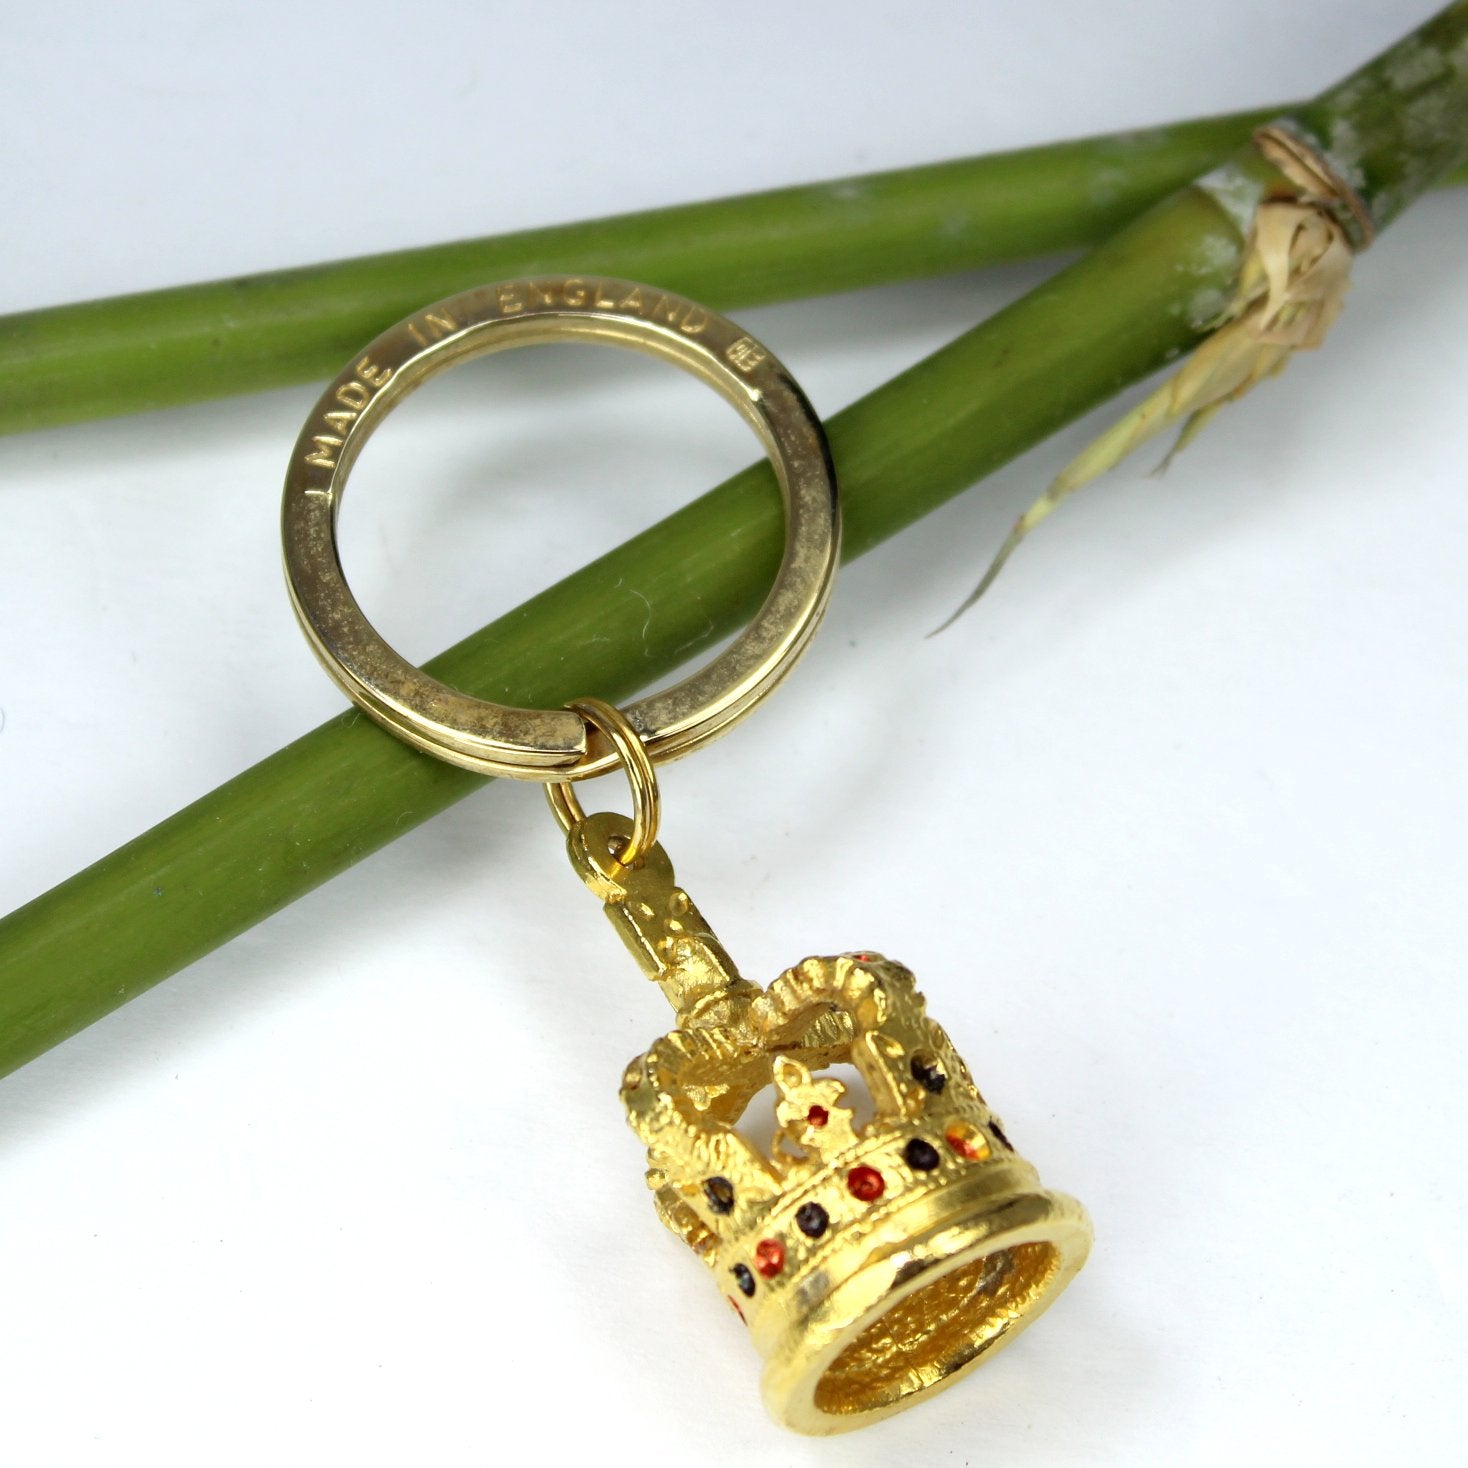 Queen's Royal Crown Keychain Key Ring  Made England Heavy Vintage Unused excellent quality